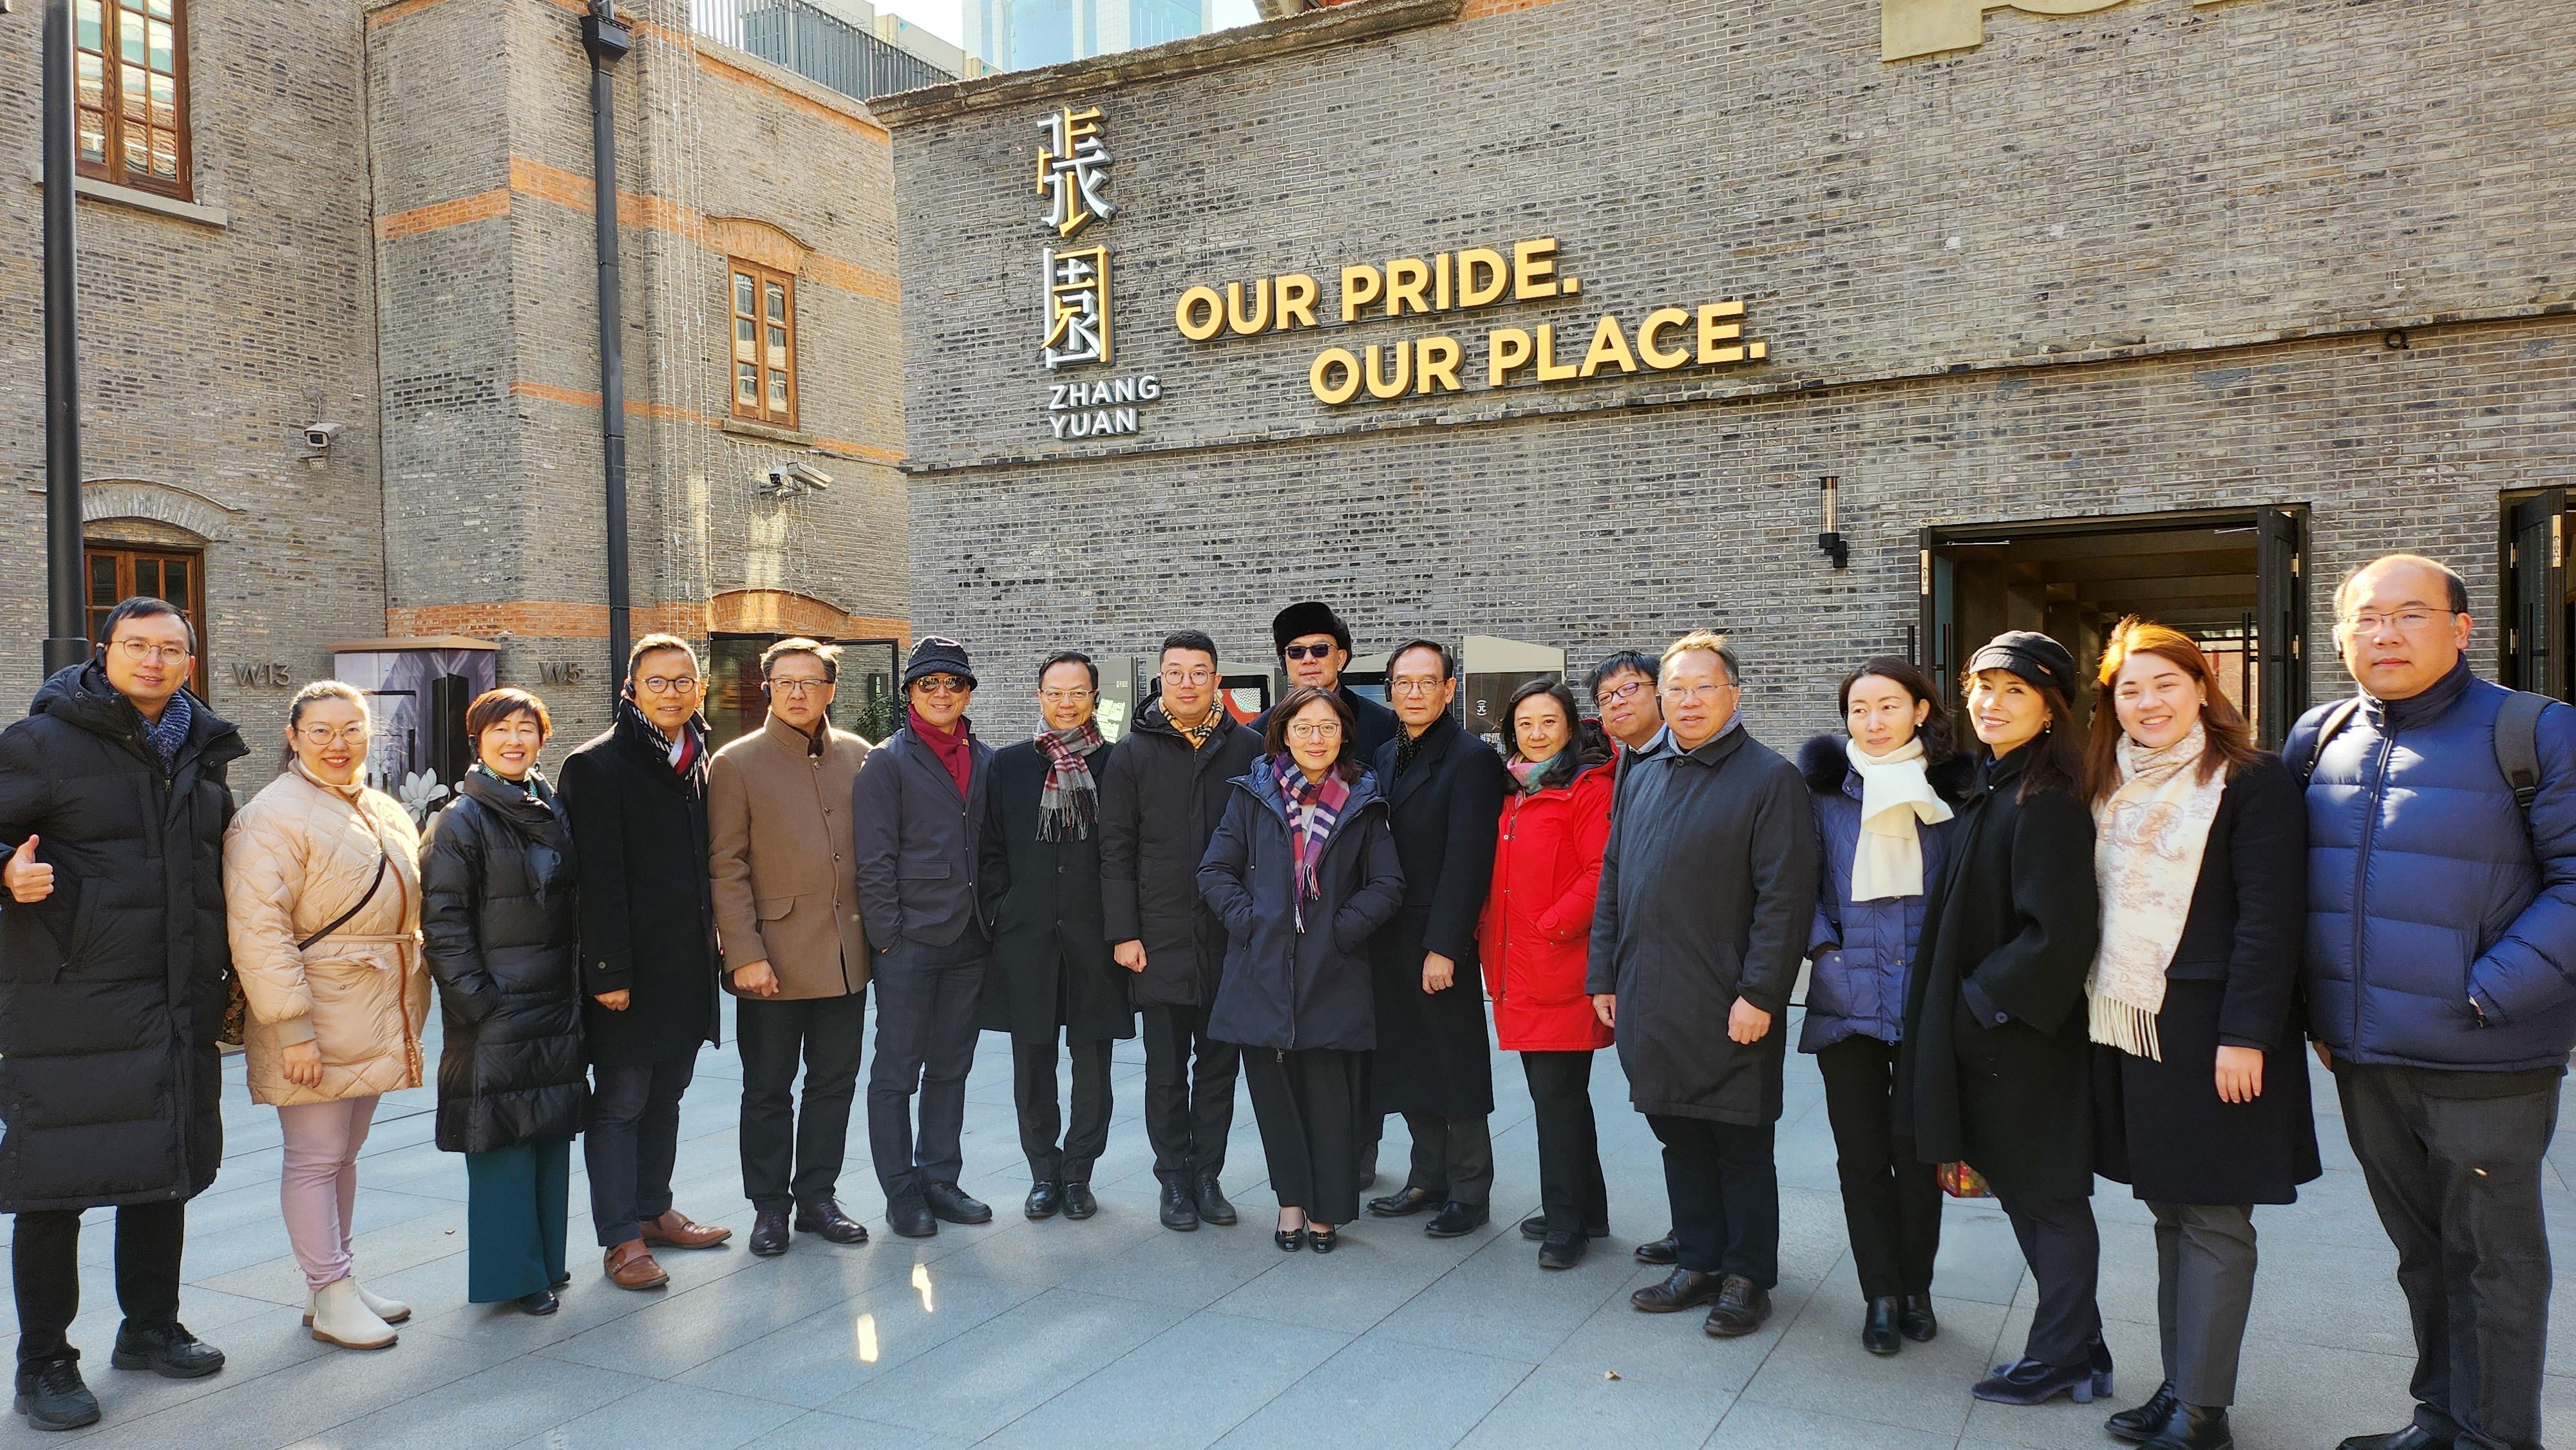 The delegation of the Legislative Council (LegCo) Panel on Development concludes its study visit to Shanghai today (December 21). Photo shows the Secretary for Development, Ms Bernadette Linn (ninth left), LegCo Members and government officials, posing for a group photo in Zhang Yuan.